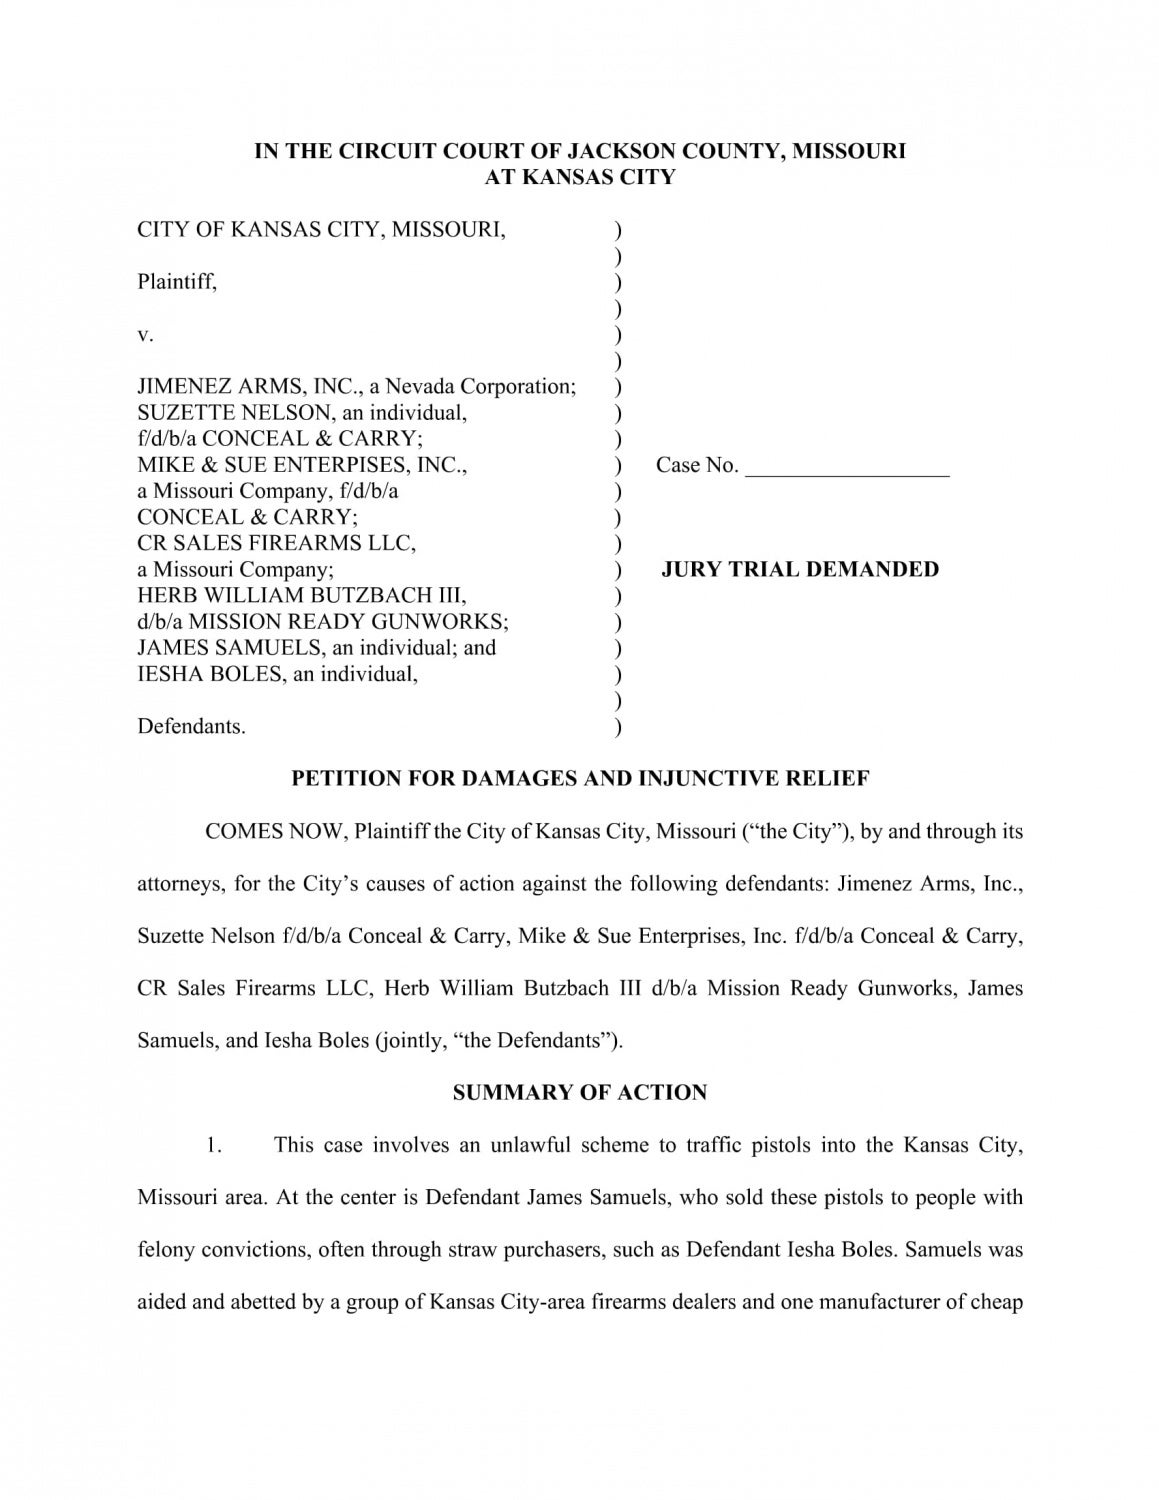 The first page of KCMO's 35-page lawsuit against Jimenez Arms and others.